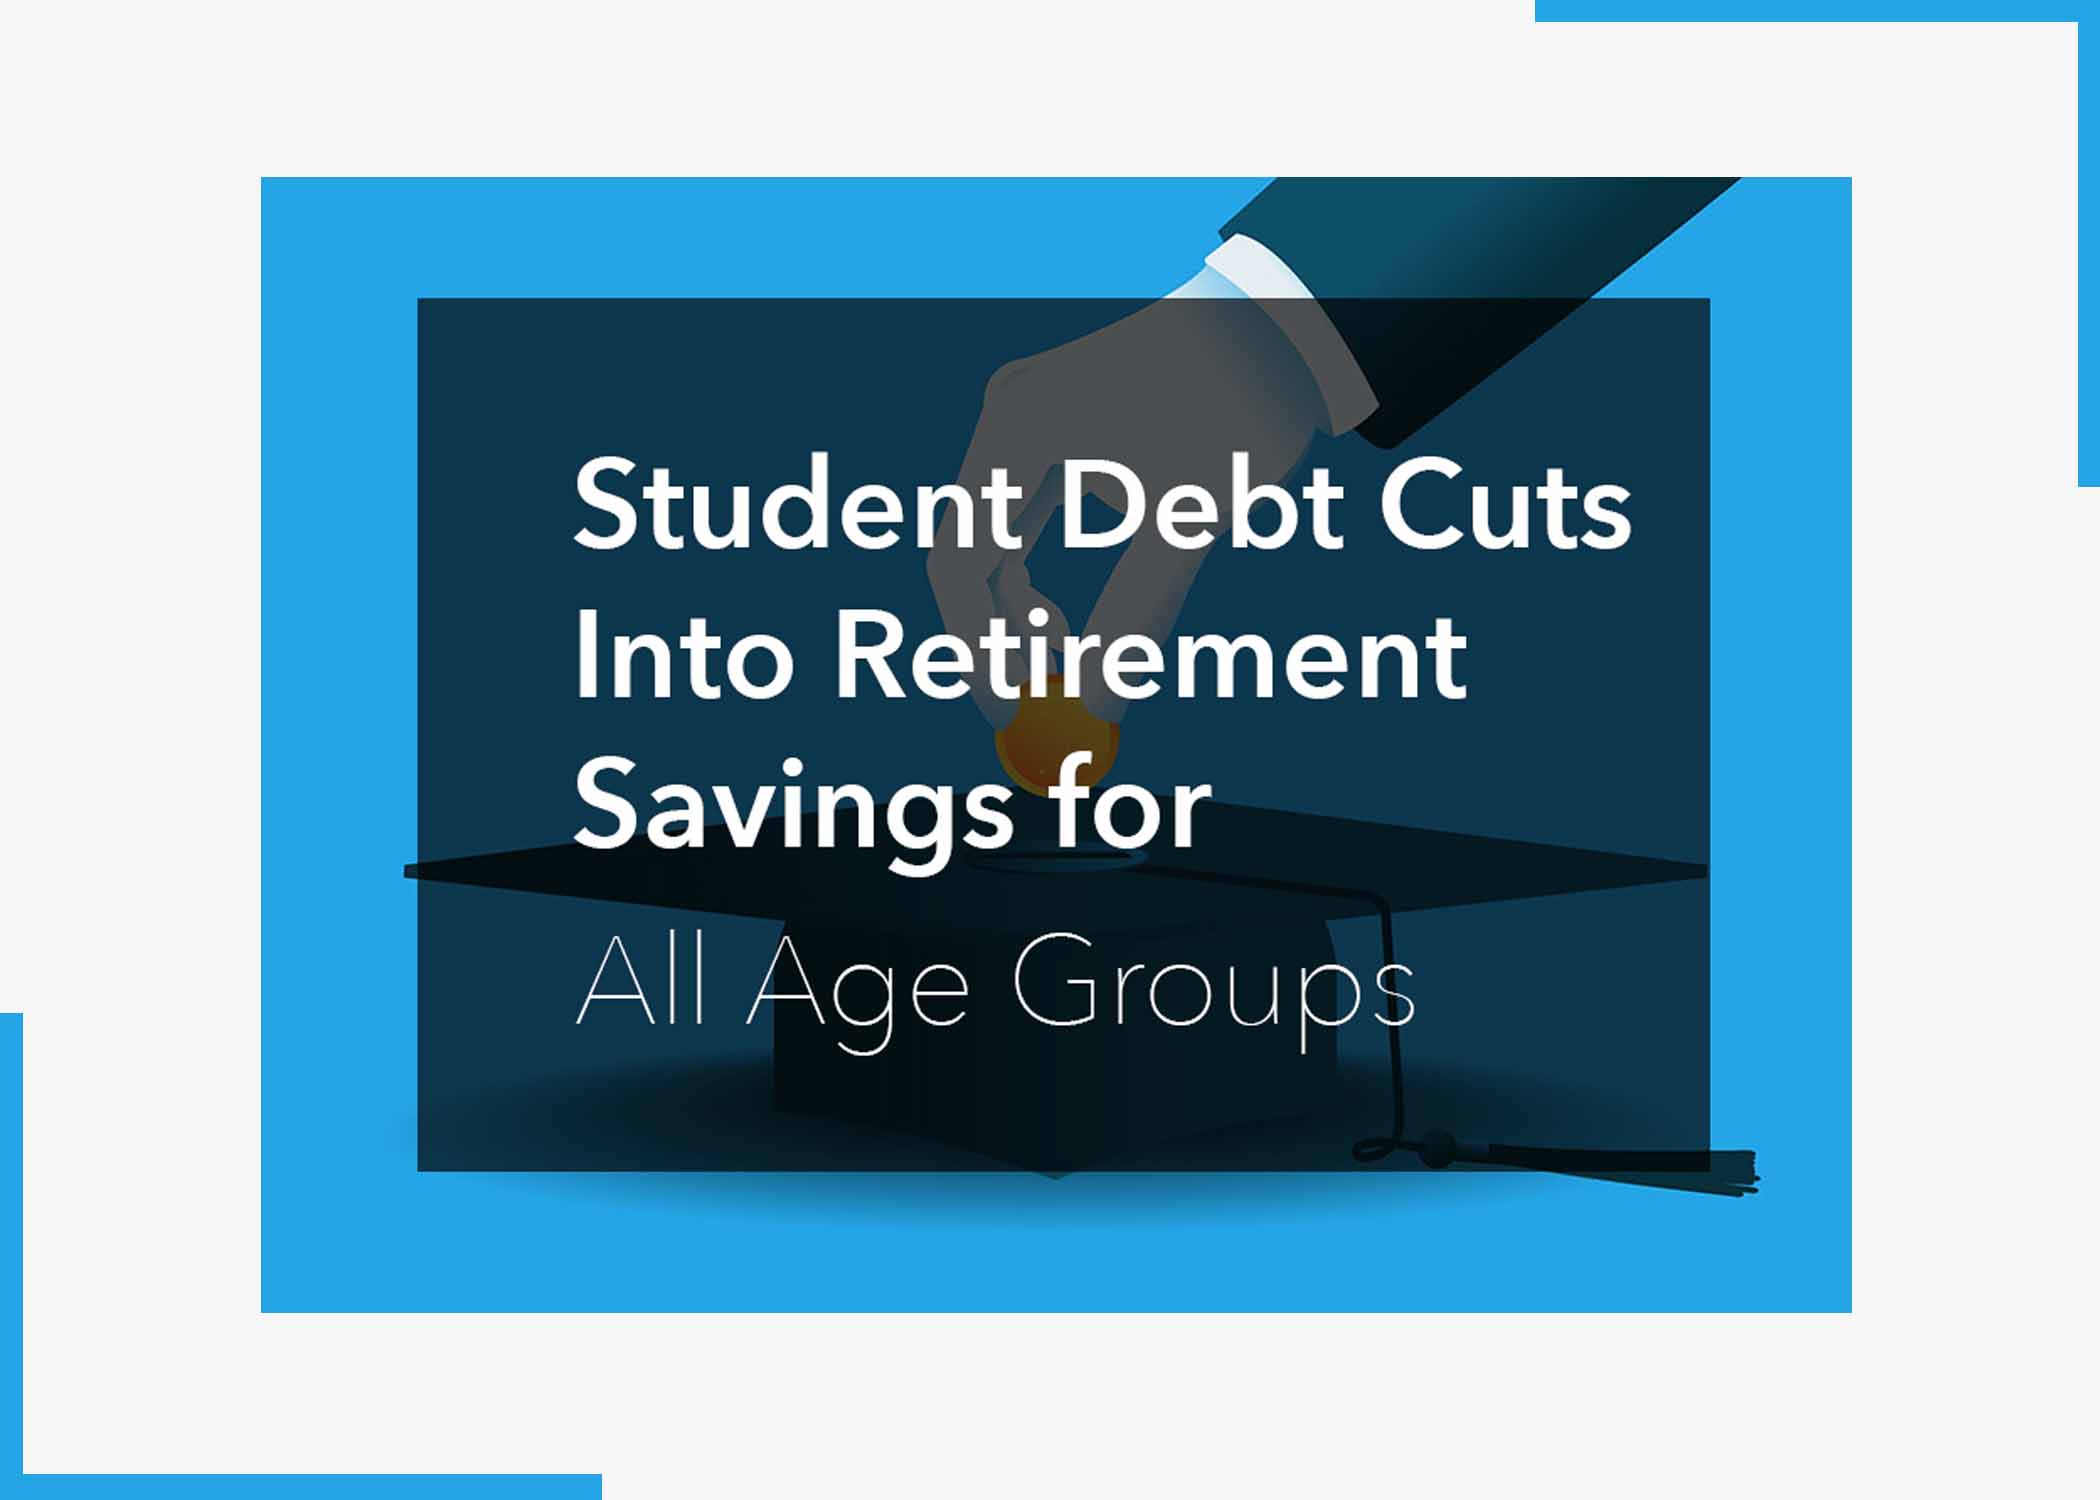 Student Debt Cuts Into Retirement Savings for All Age Groups